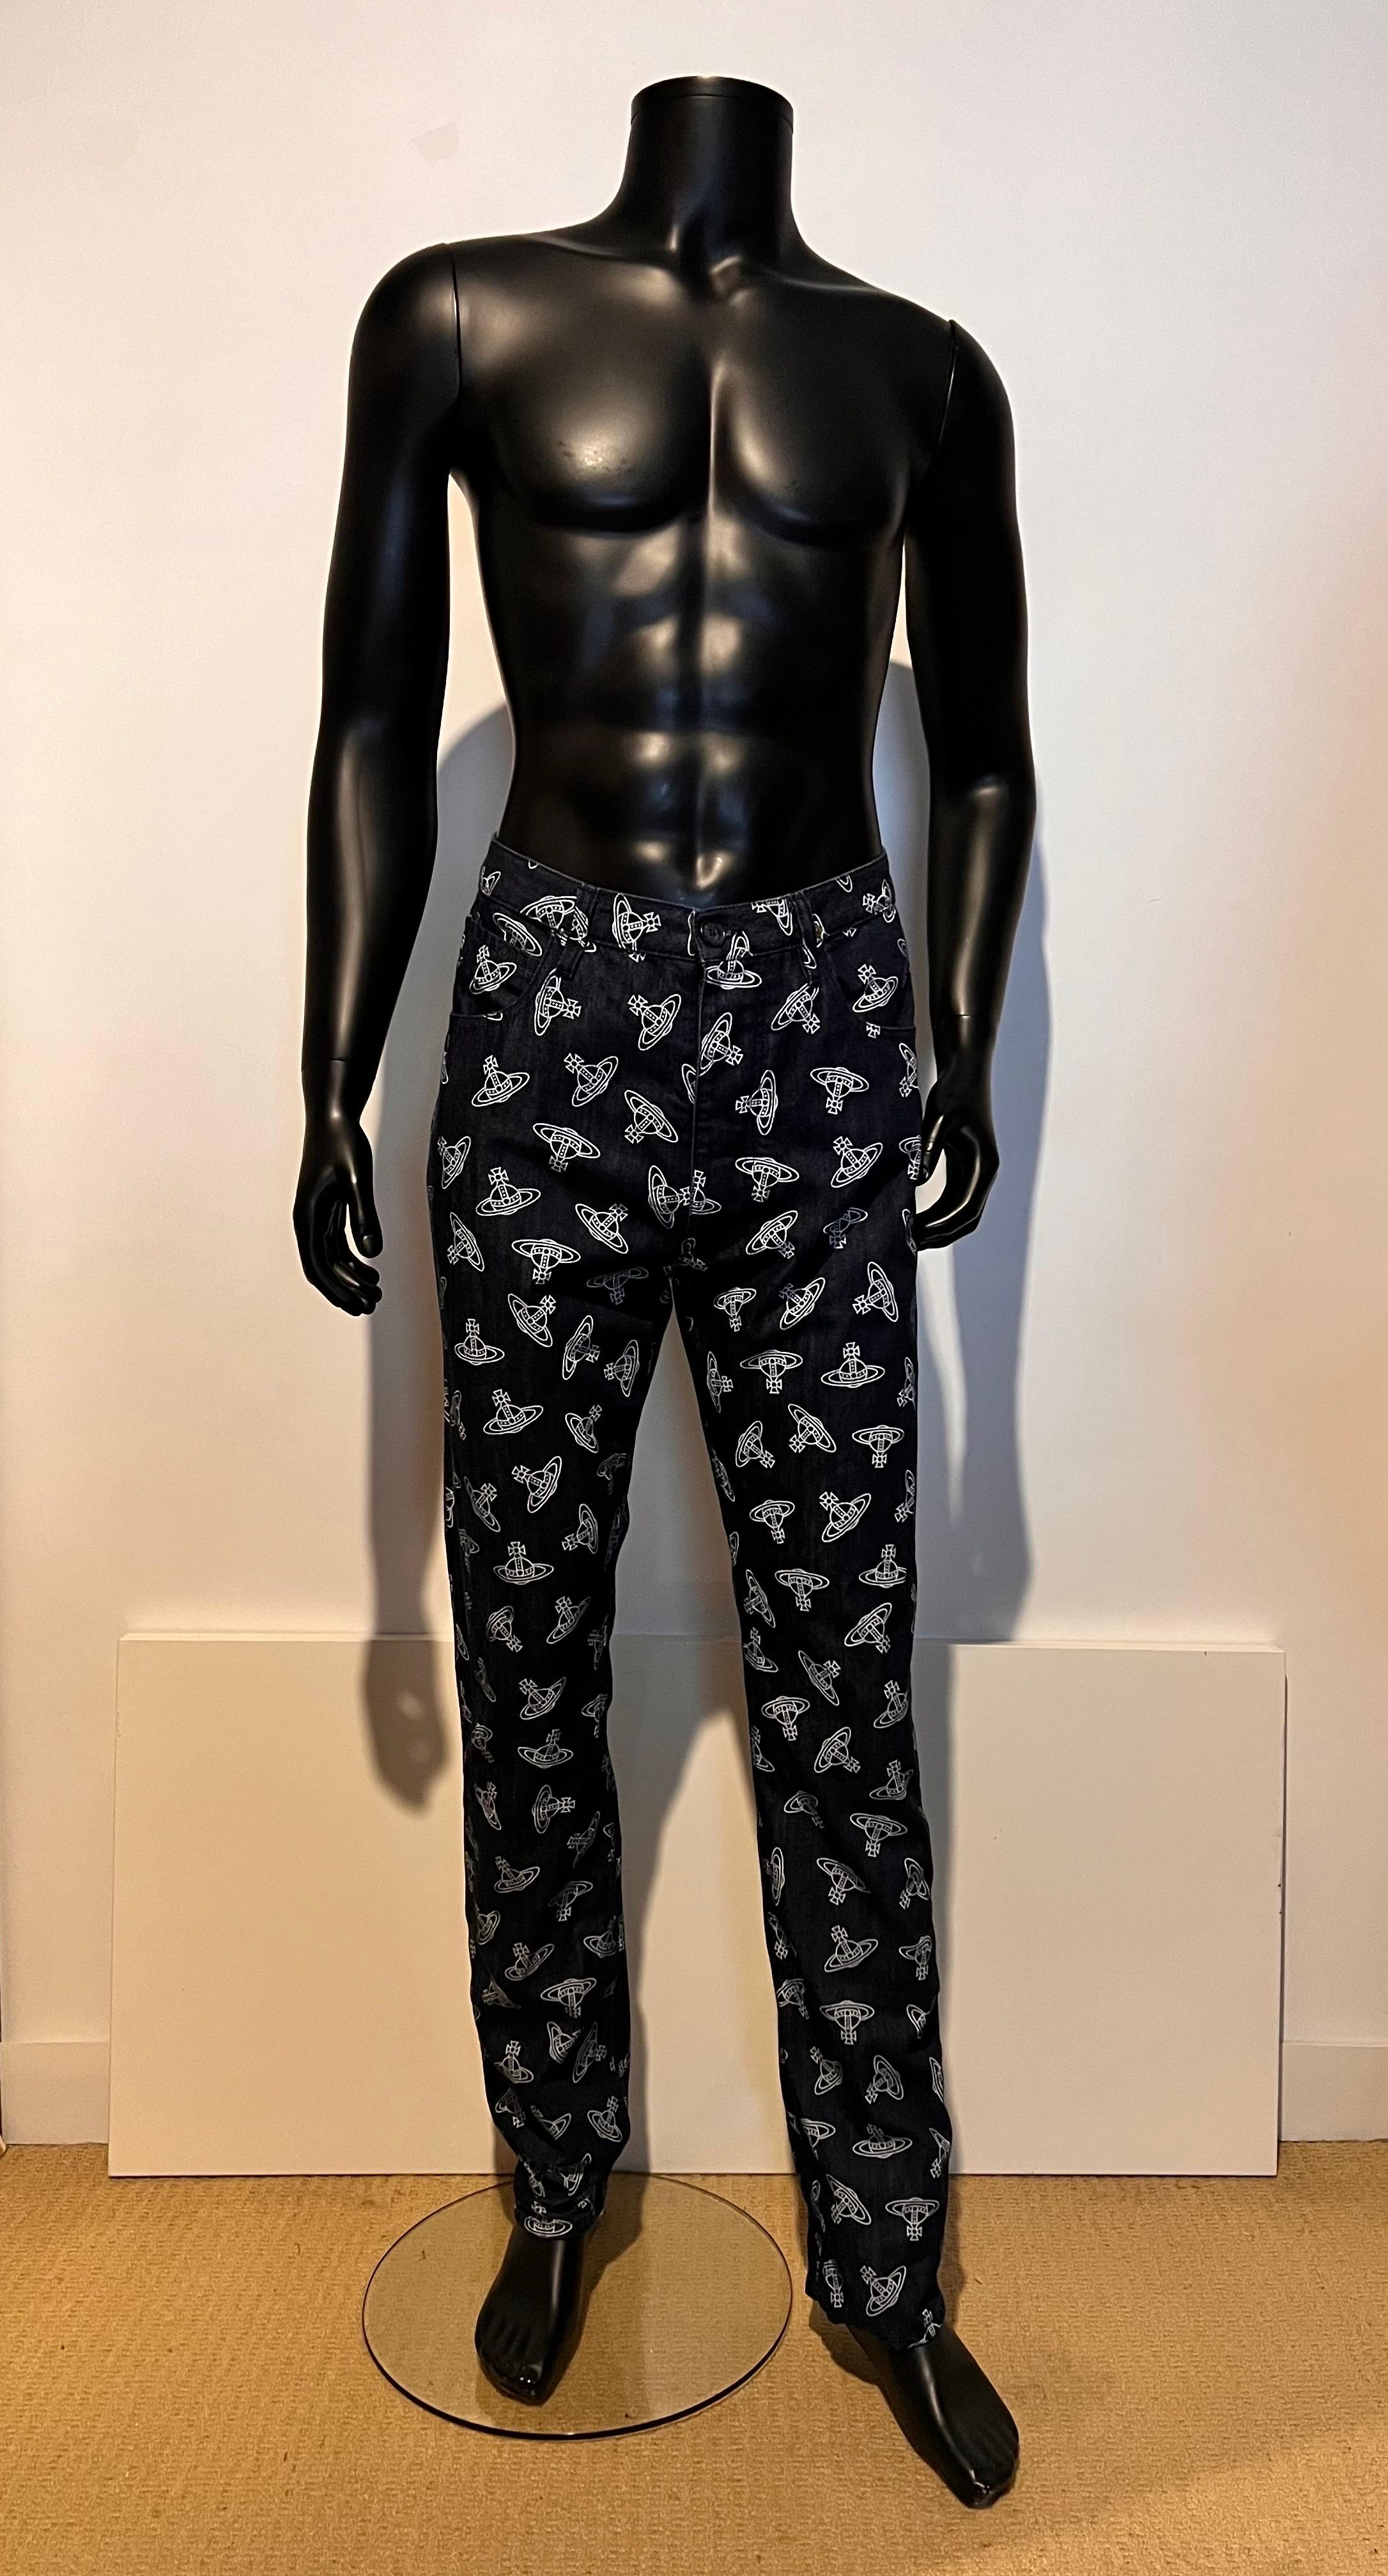 VINTAGE VIVIENNE WESTWOOD Anglomania mens Orb print denim jeans in white on blue print.
 Features gorgeous signature orb print. 

In very good condition. 

A great piece of the Vivienne Westwood jeans line Anglomania

A chance to have a piece from